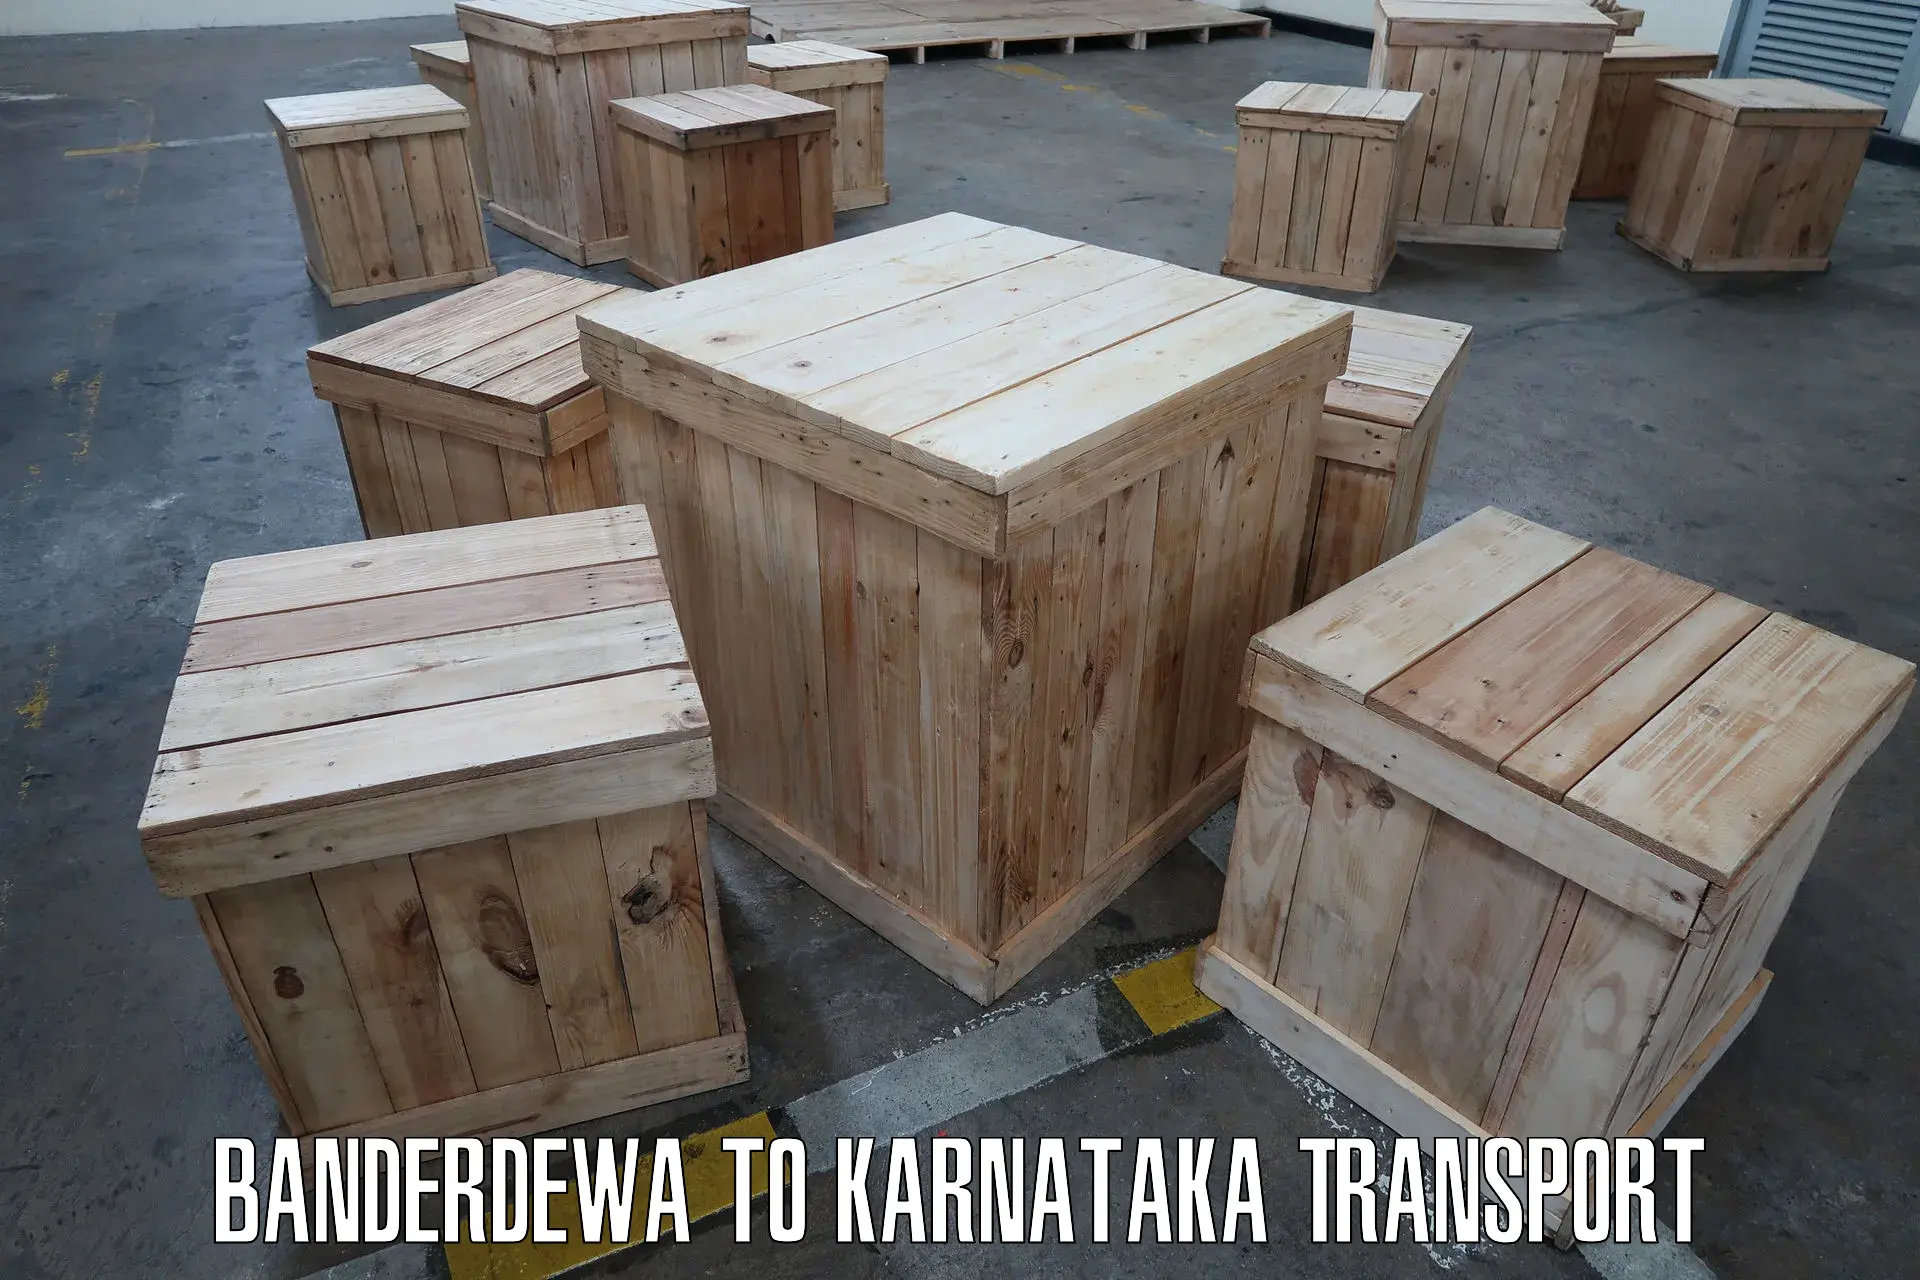 Transport bike from one state to another Banderdewa to Ramanagara